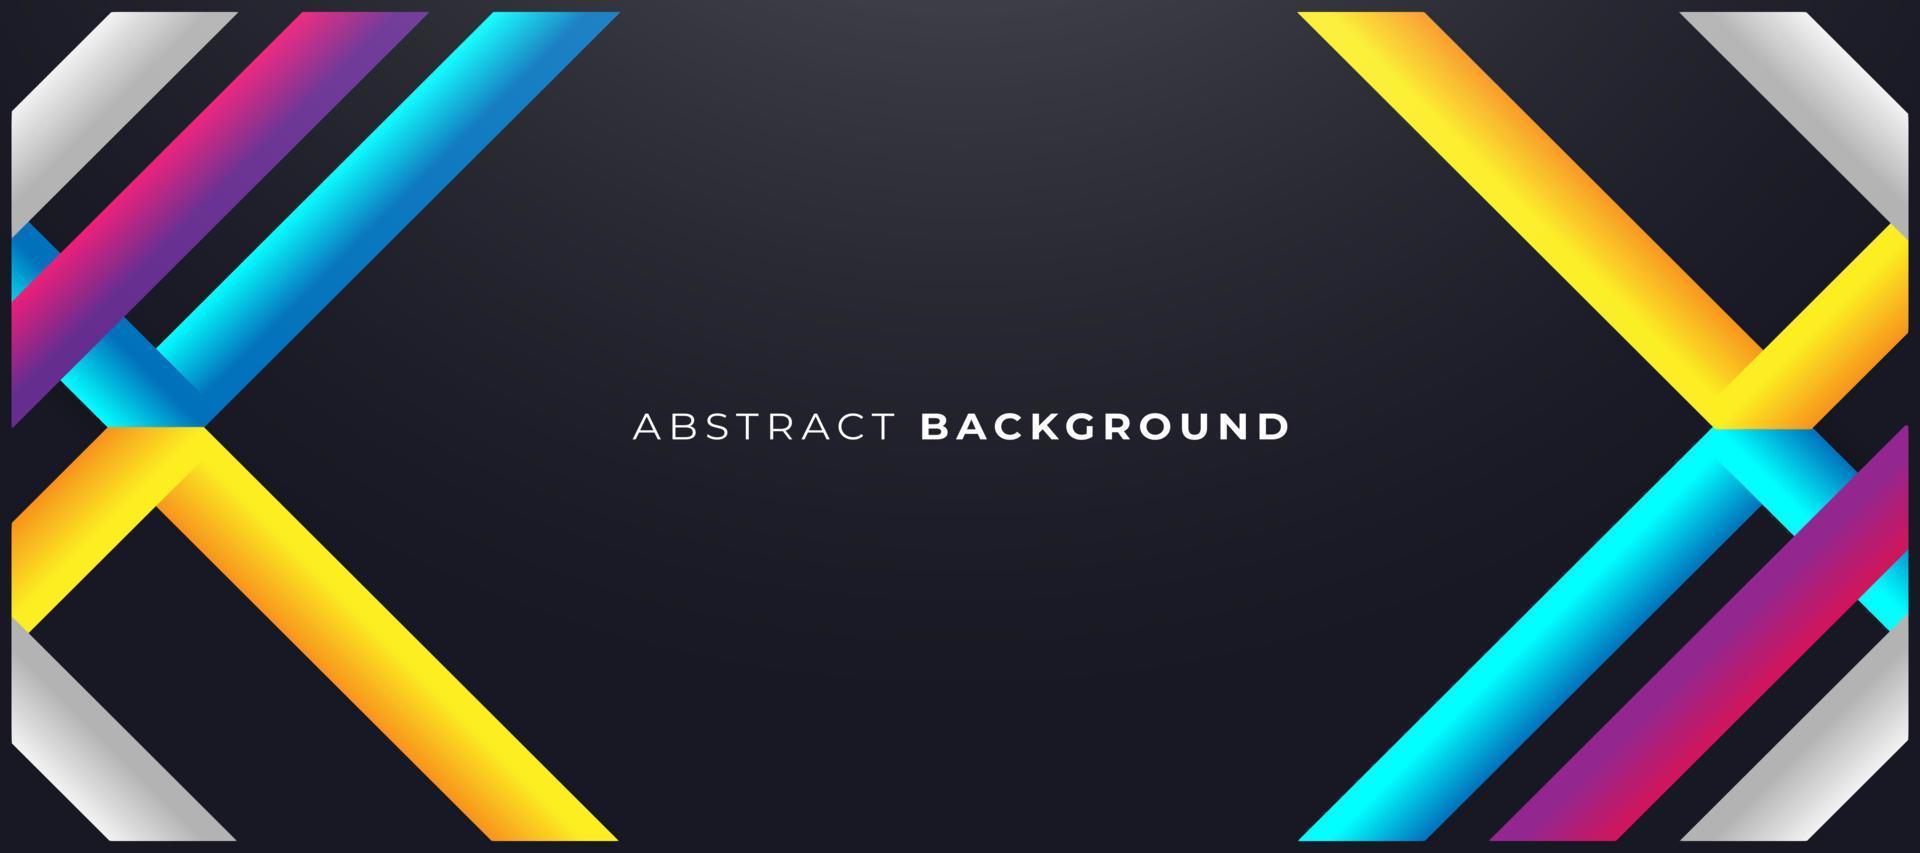 Trendy modern abstract background in bold colors-01 vector